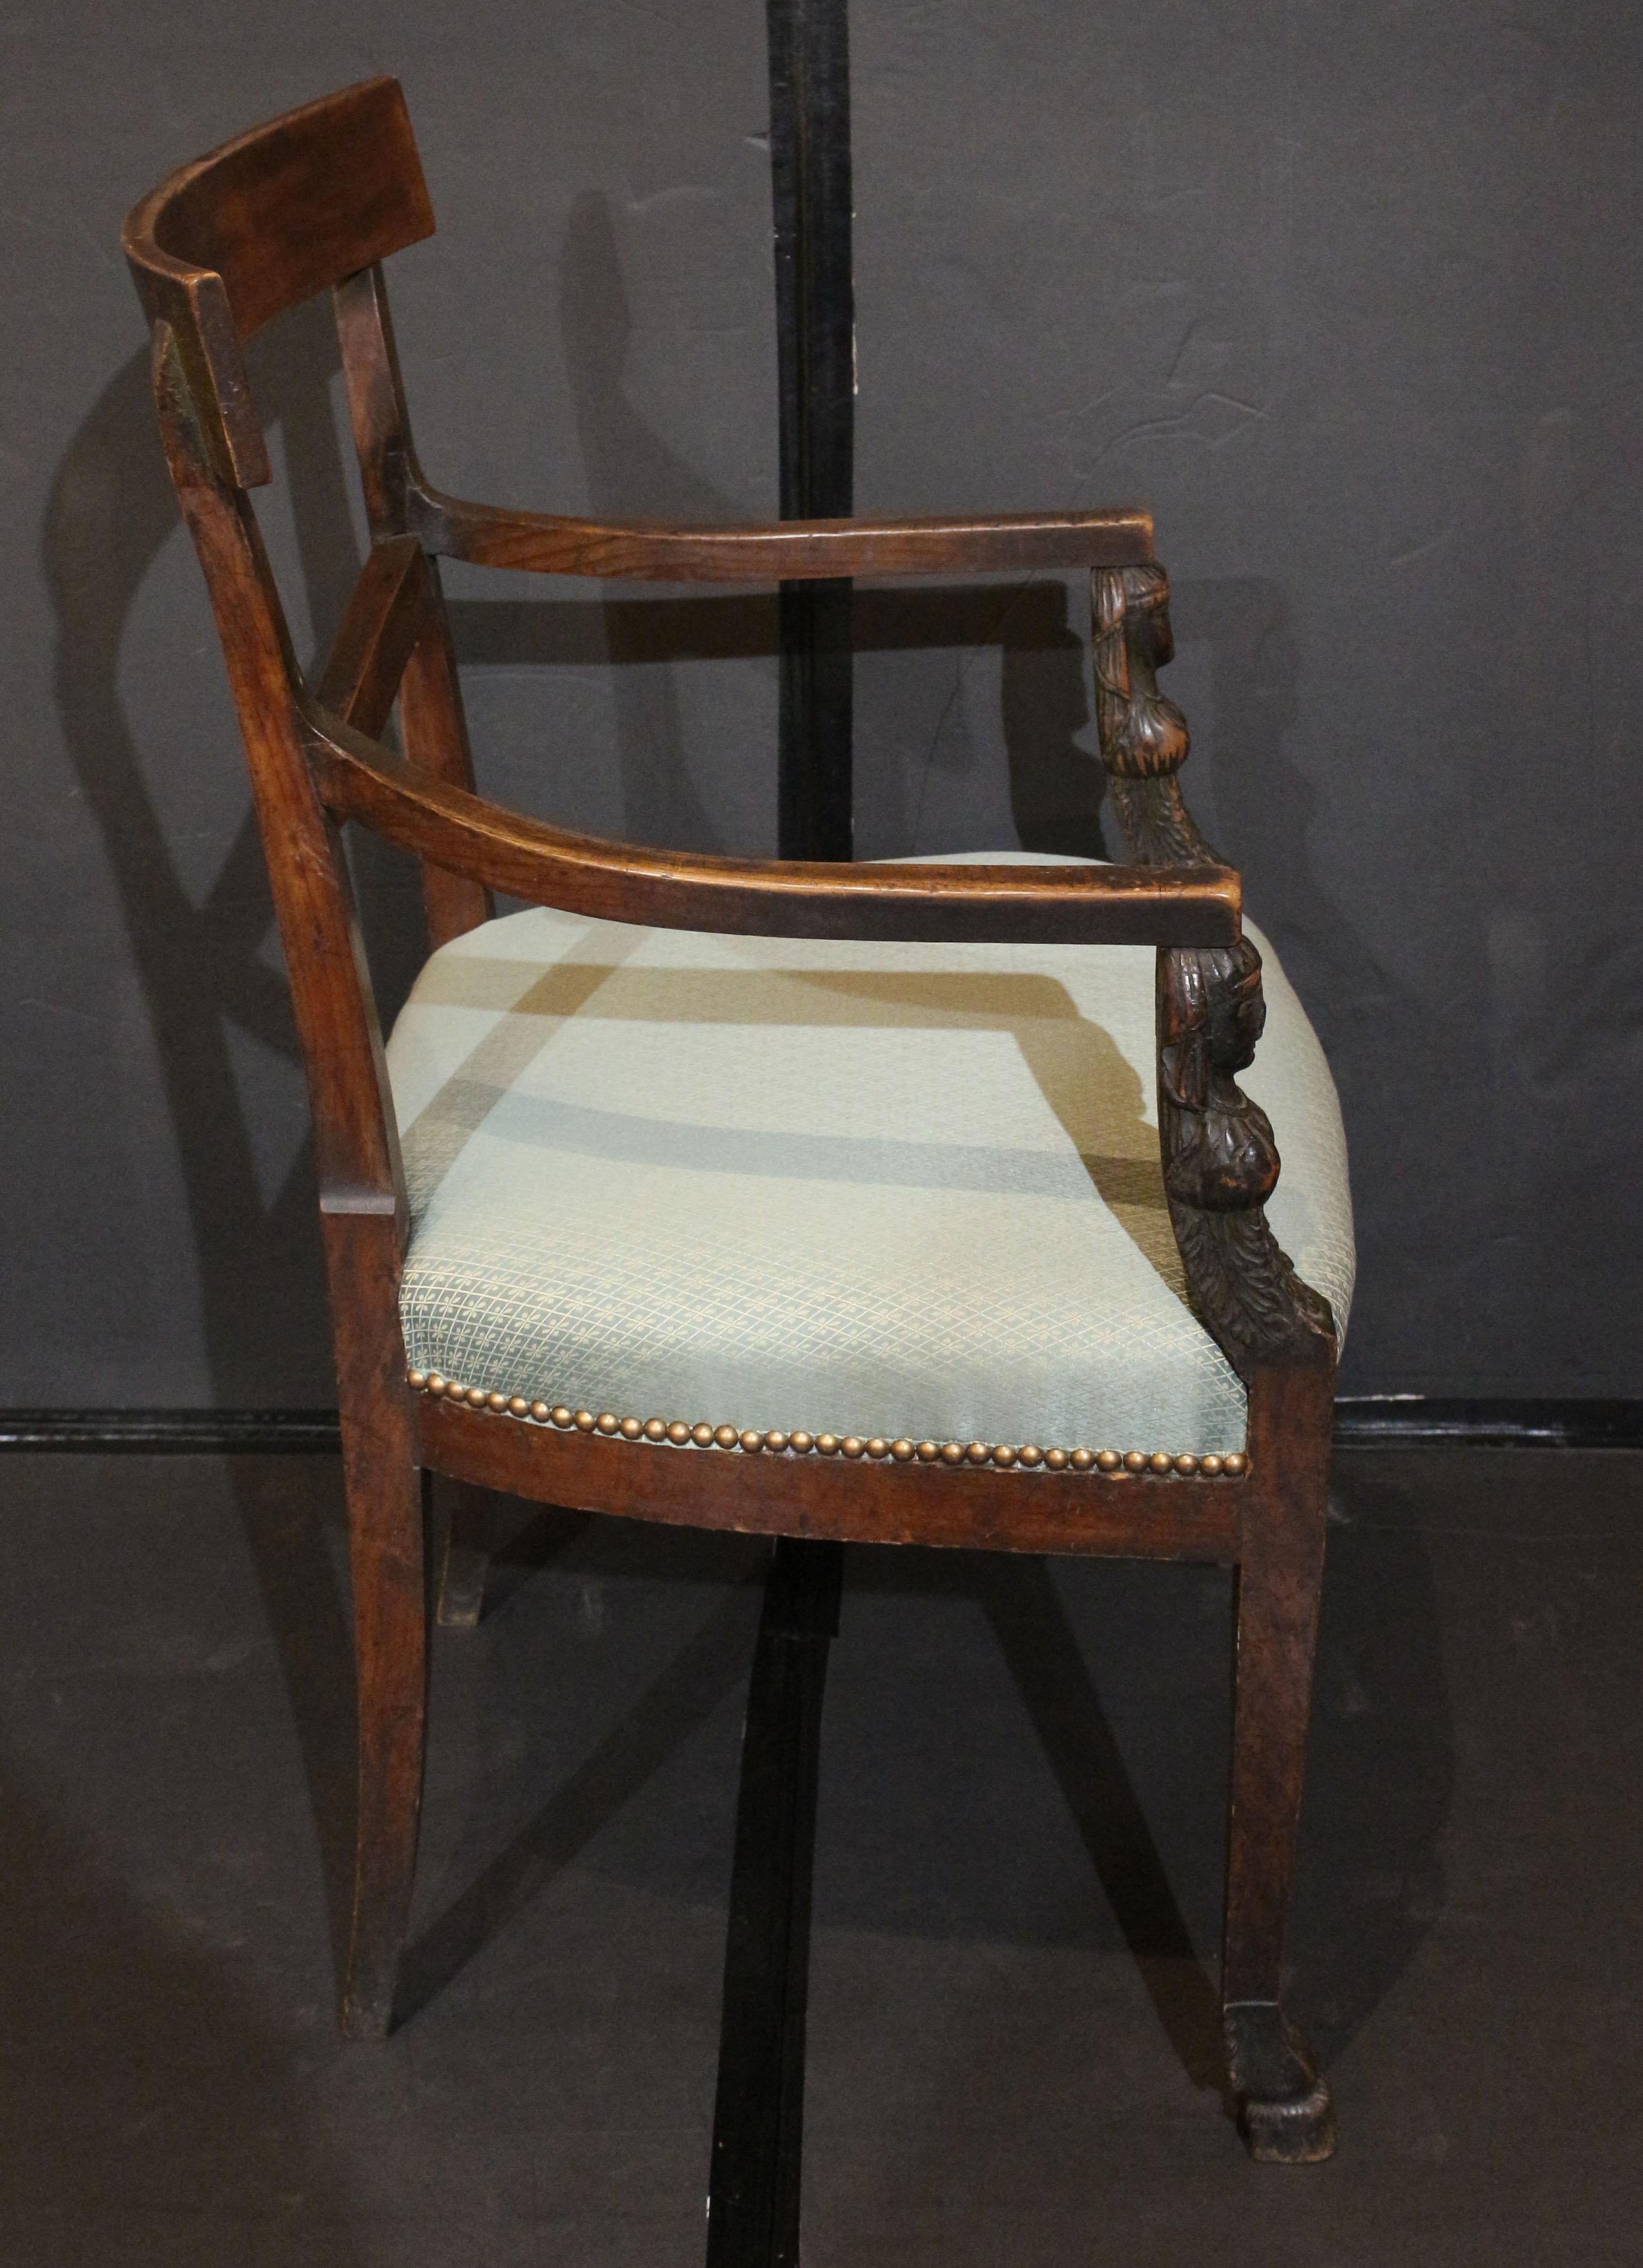 Wood Early 19th Century Empire Period Fauteuil (or Open Arm Chair), French